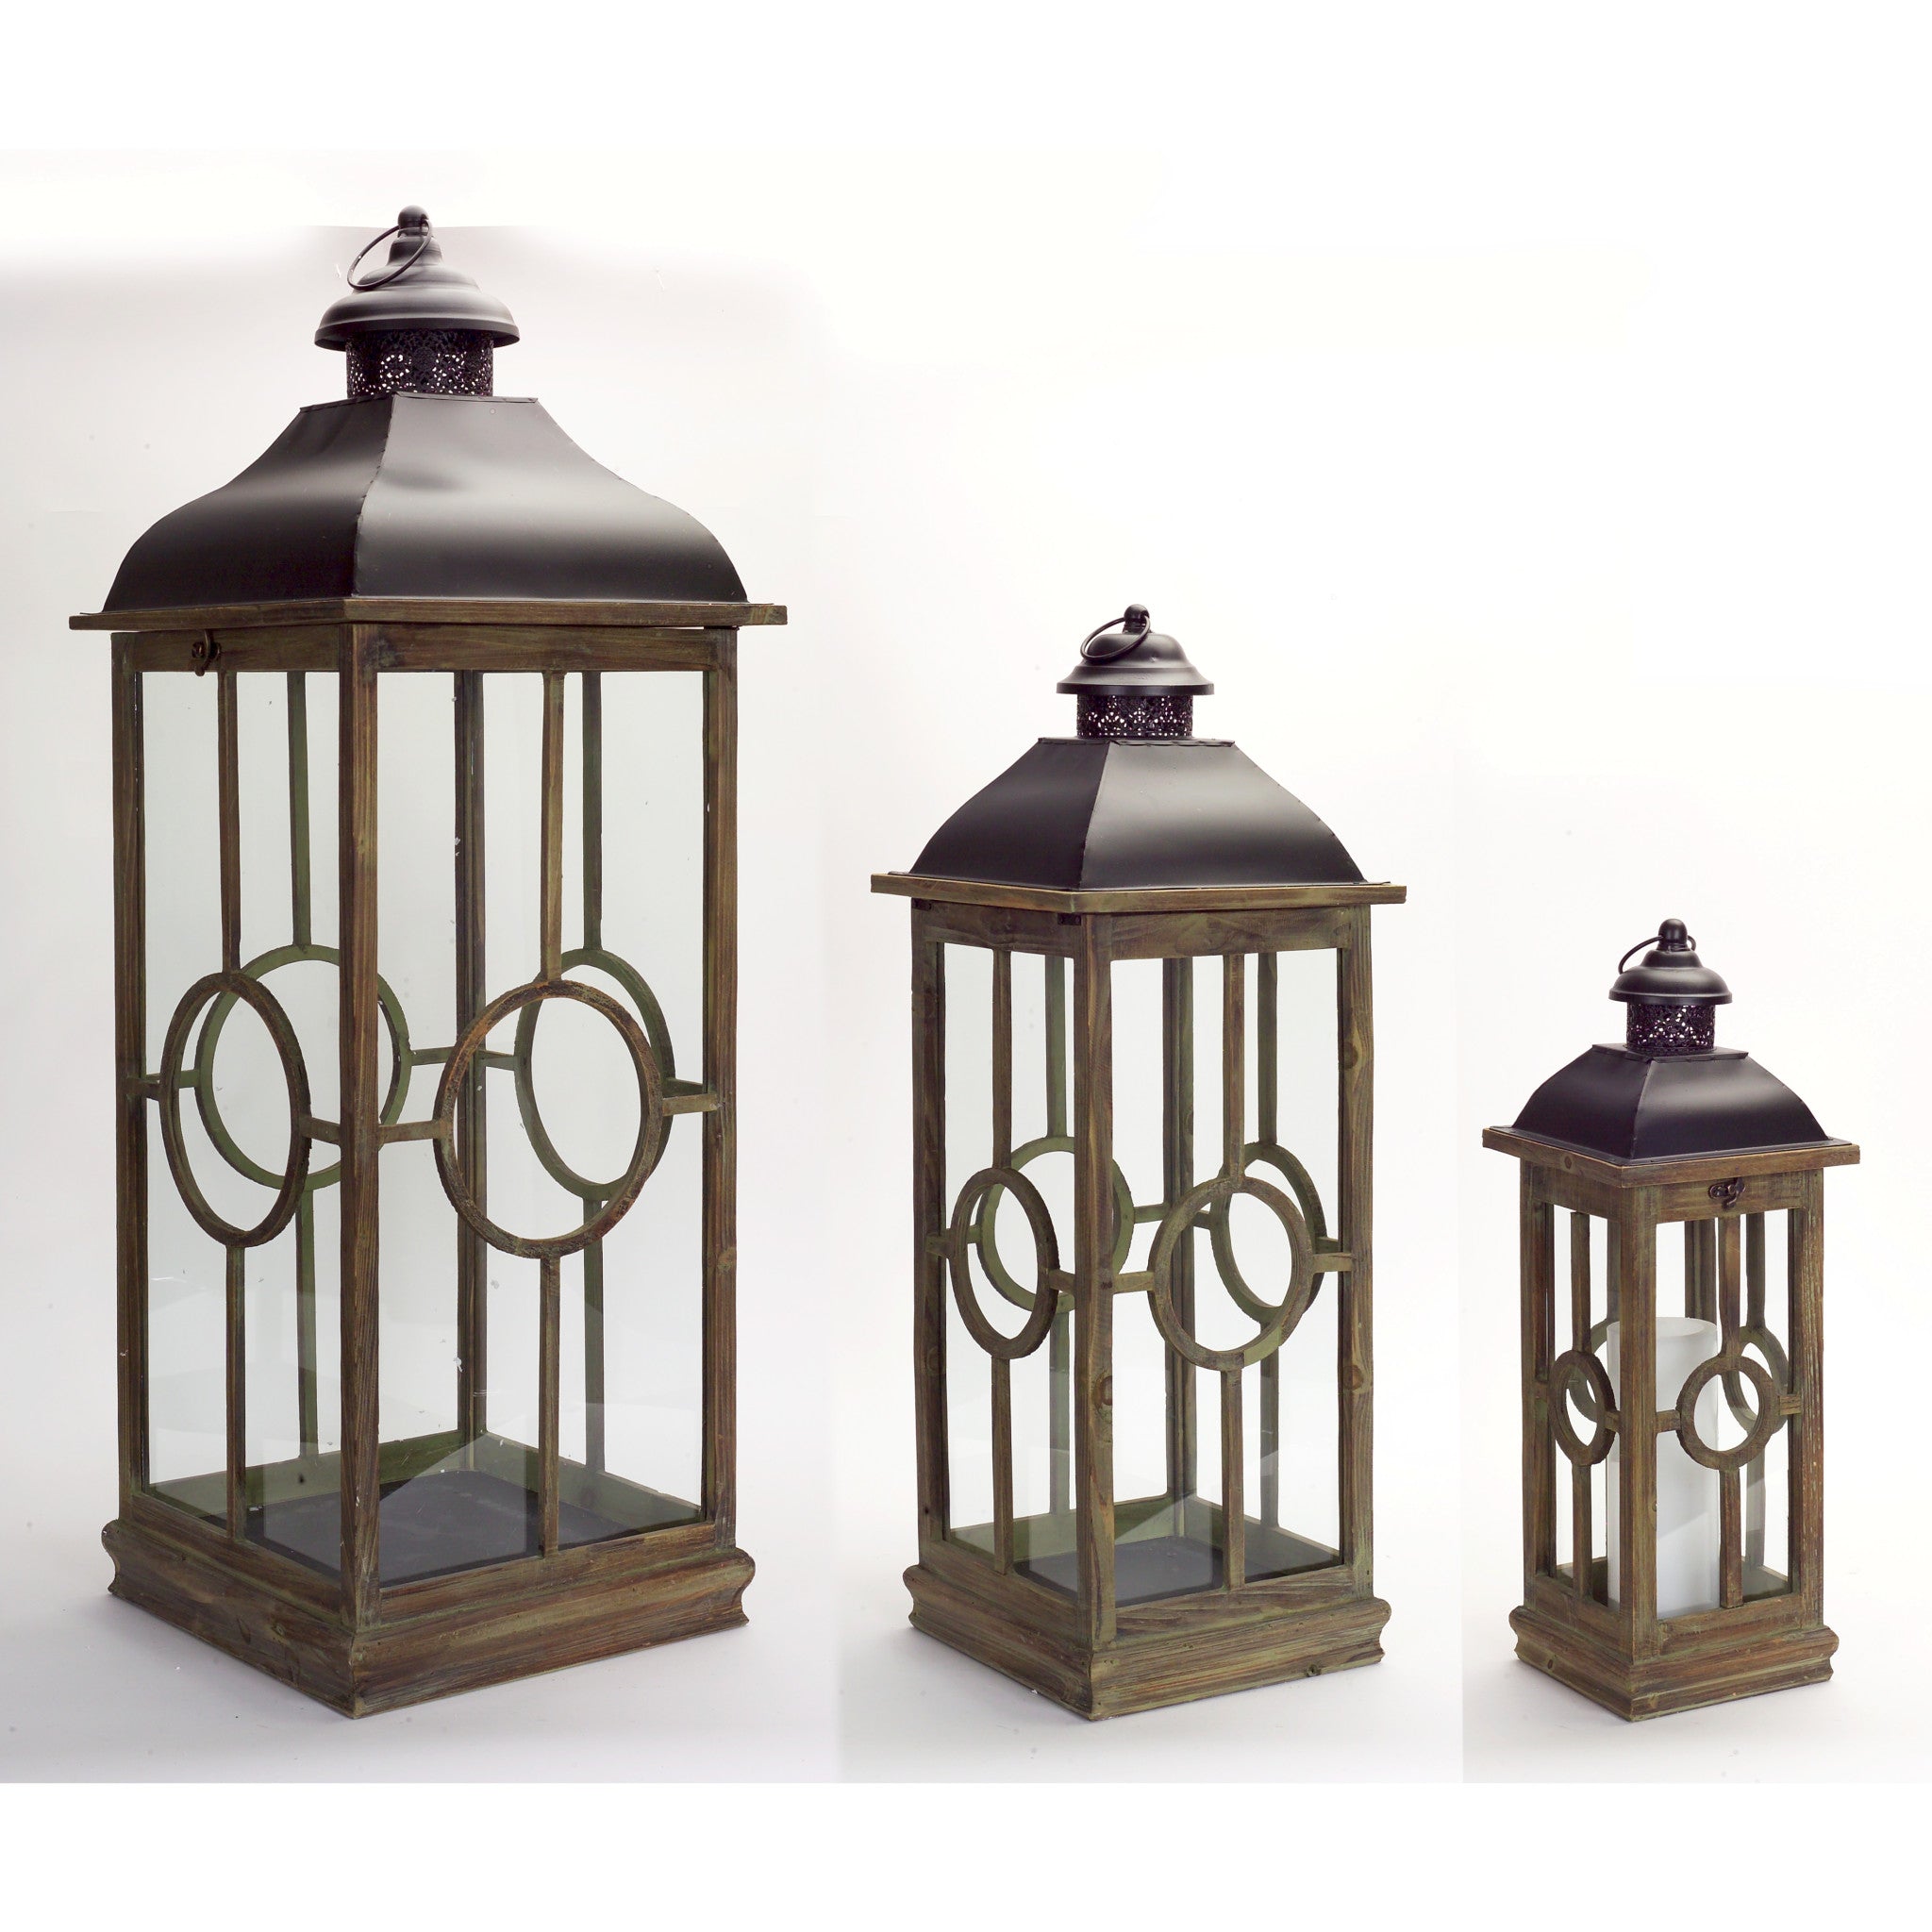 Flameless-Three-Candles-Floor-Lantern-Candle-Holders